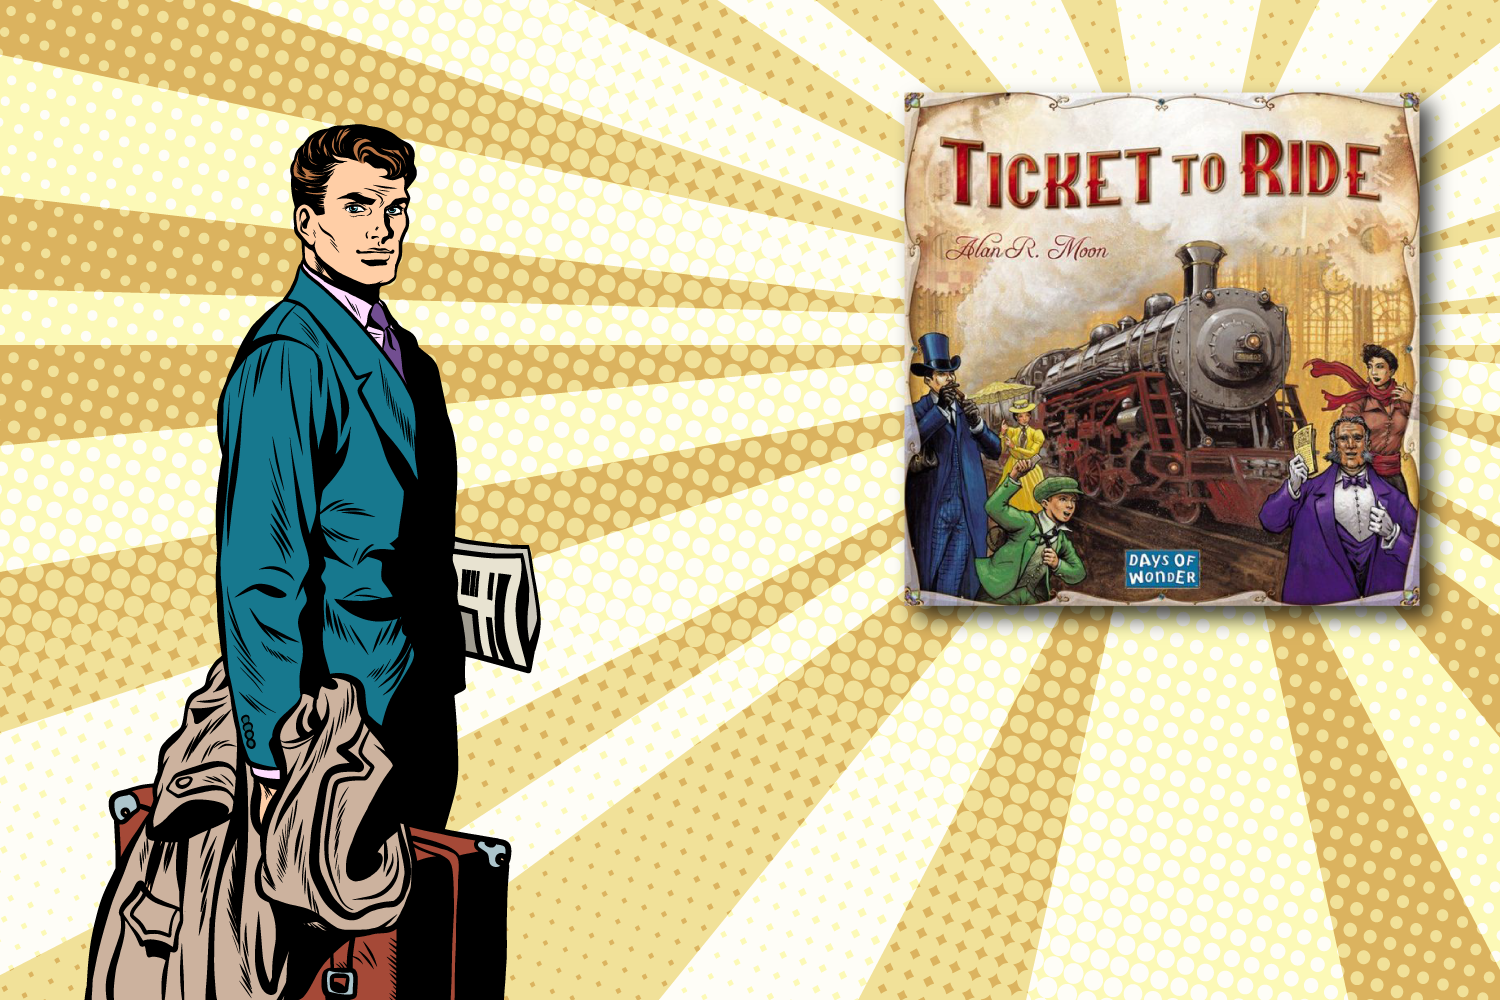 Ticket-to-ride-header-image-new